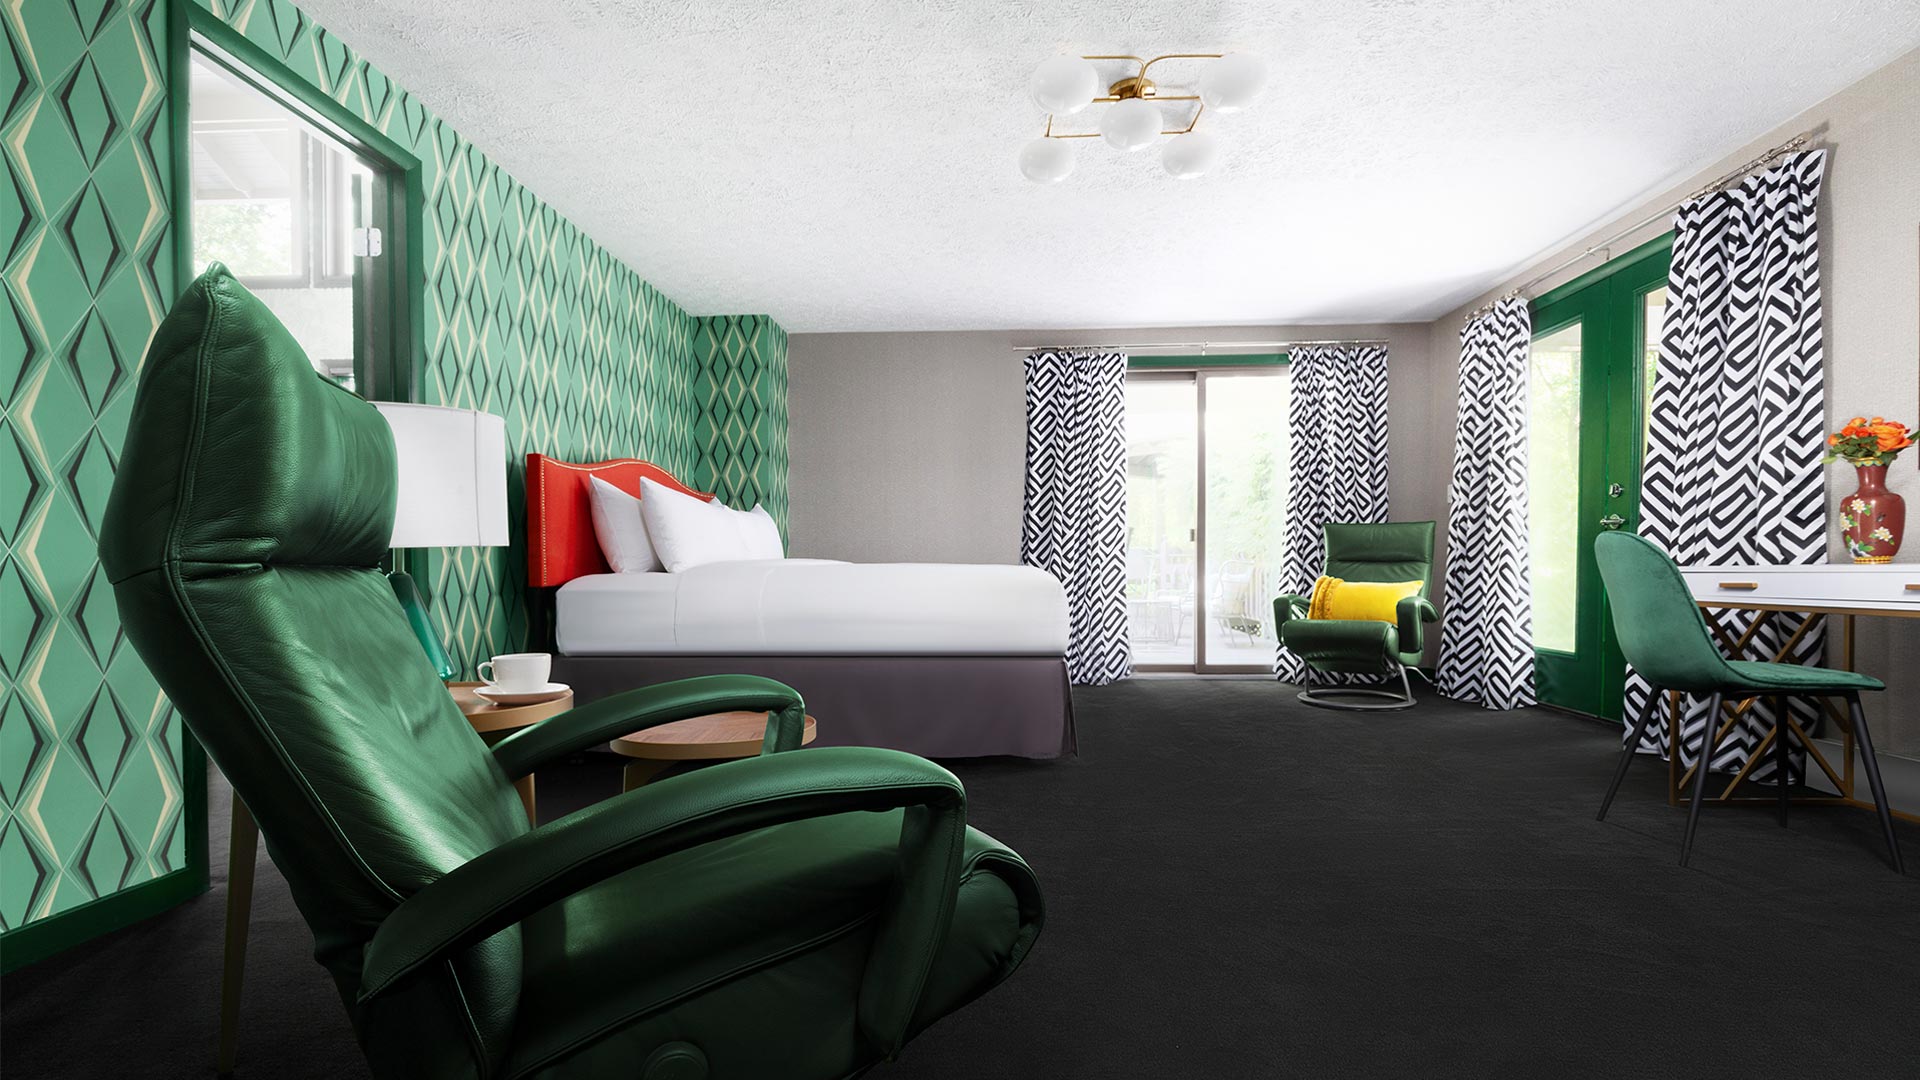 an interior shot of a bedroom. There is an emerald green chair in the foreground. There is a bed with white linens and red headboard. There are sliding doors leading out onto a patio and another green chair next to the doors.